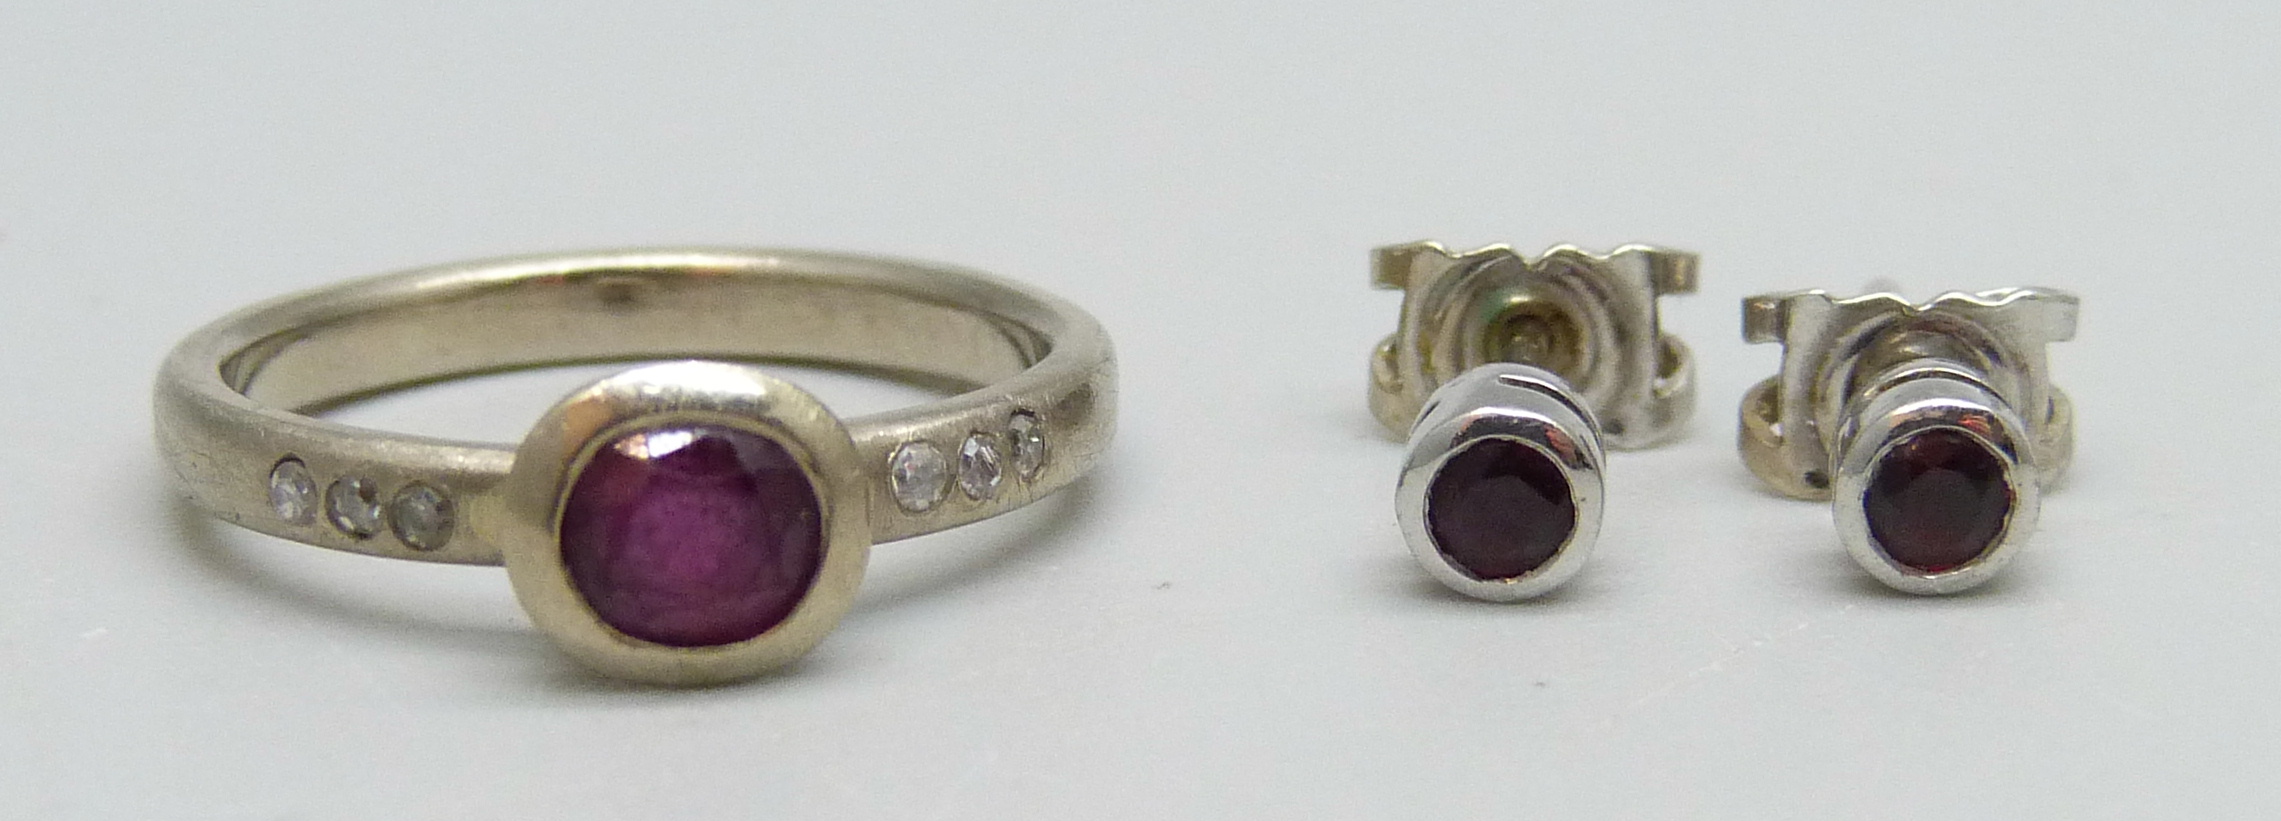 A 14ct white gold, diamond and ruby ring, M, and a pair of 18ct white gold and ruby stud earrings,